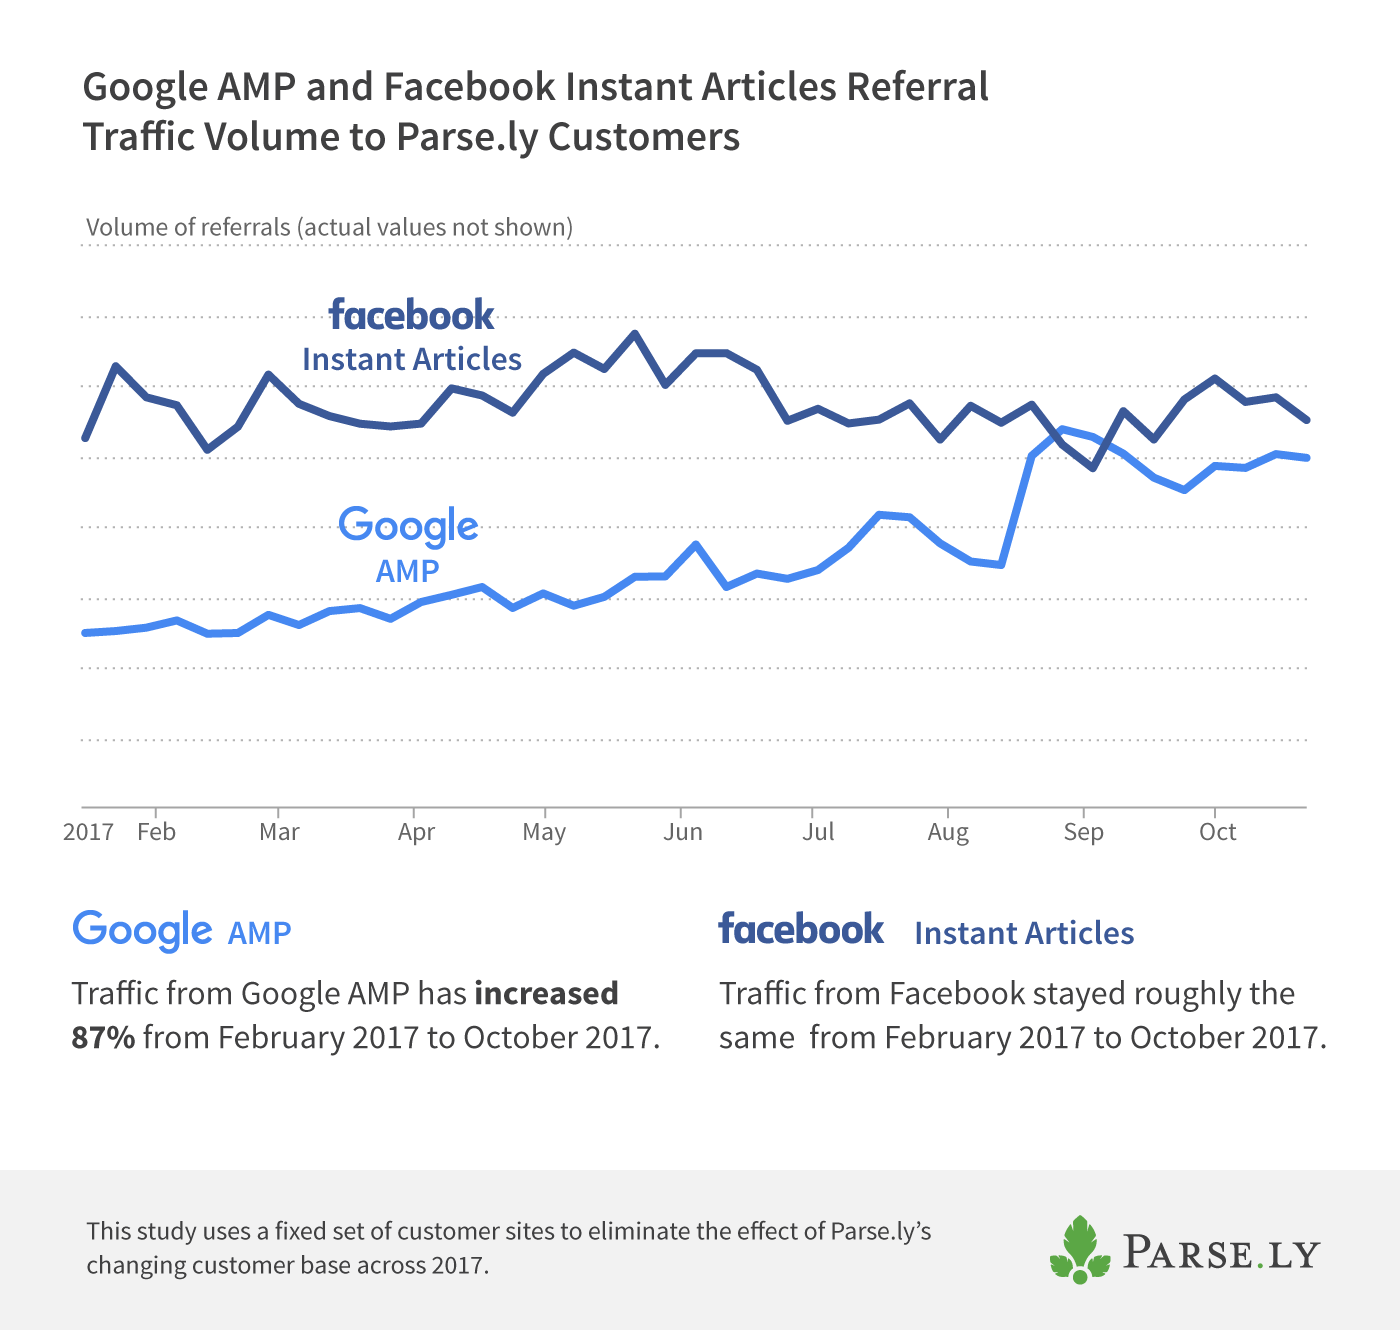 Google AMP and Facebook Instant Articles referral traffic